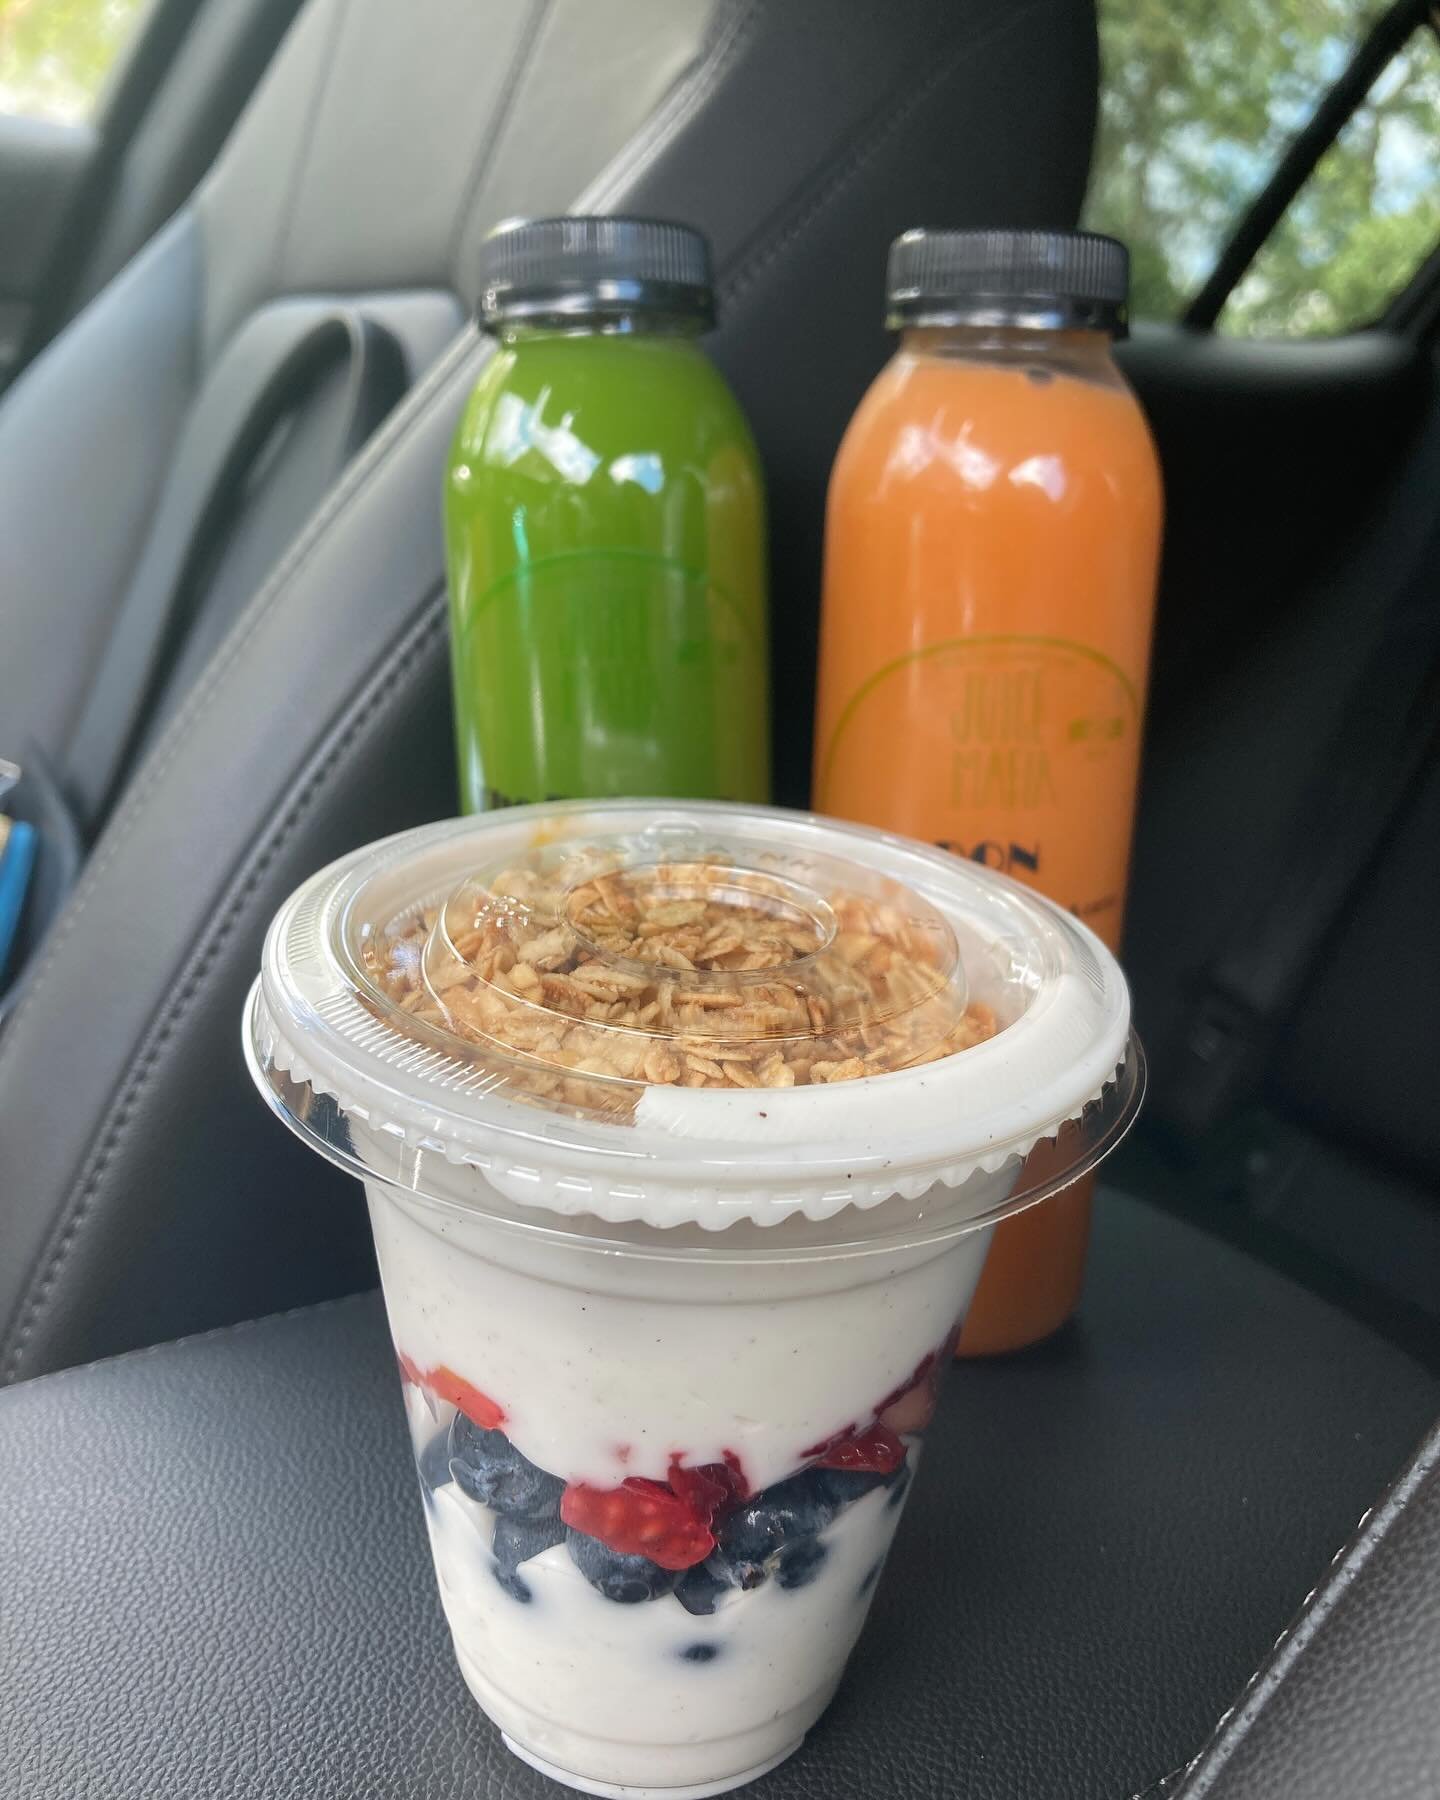 If you spend the most of your day in the car for work, @thejuicemafia is the perfect place for you! We&rsquo;ve got you covered, ensuring that you can have yummy, healthy options even when you don&rsquo;t have time to sit down and eat a meal. Our gra